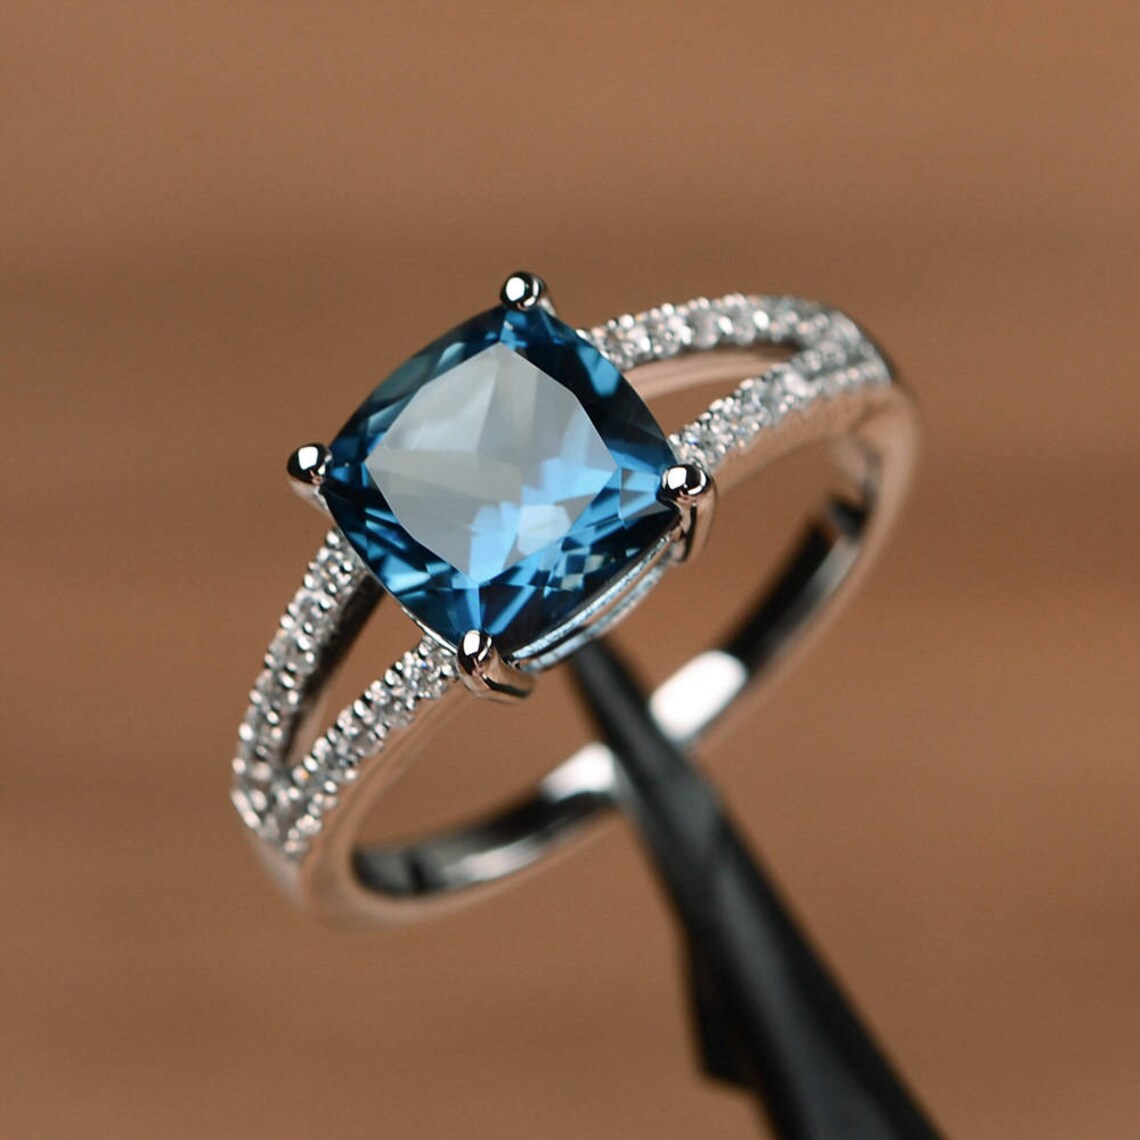 Cushion Cut London Blue Topaz Ring with Fancy Gallery and Diamond Halo in  18k white gold (GR-6112)